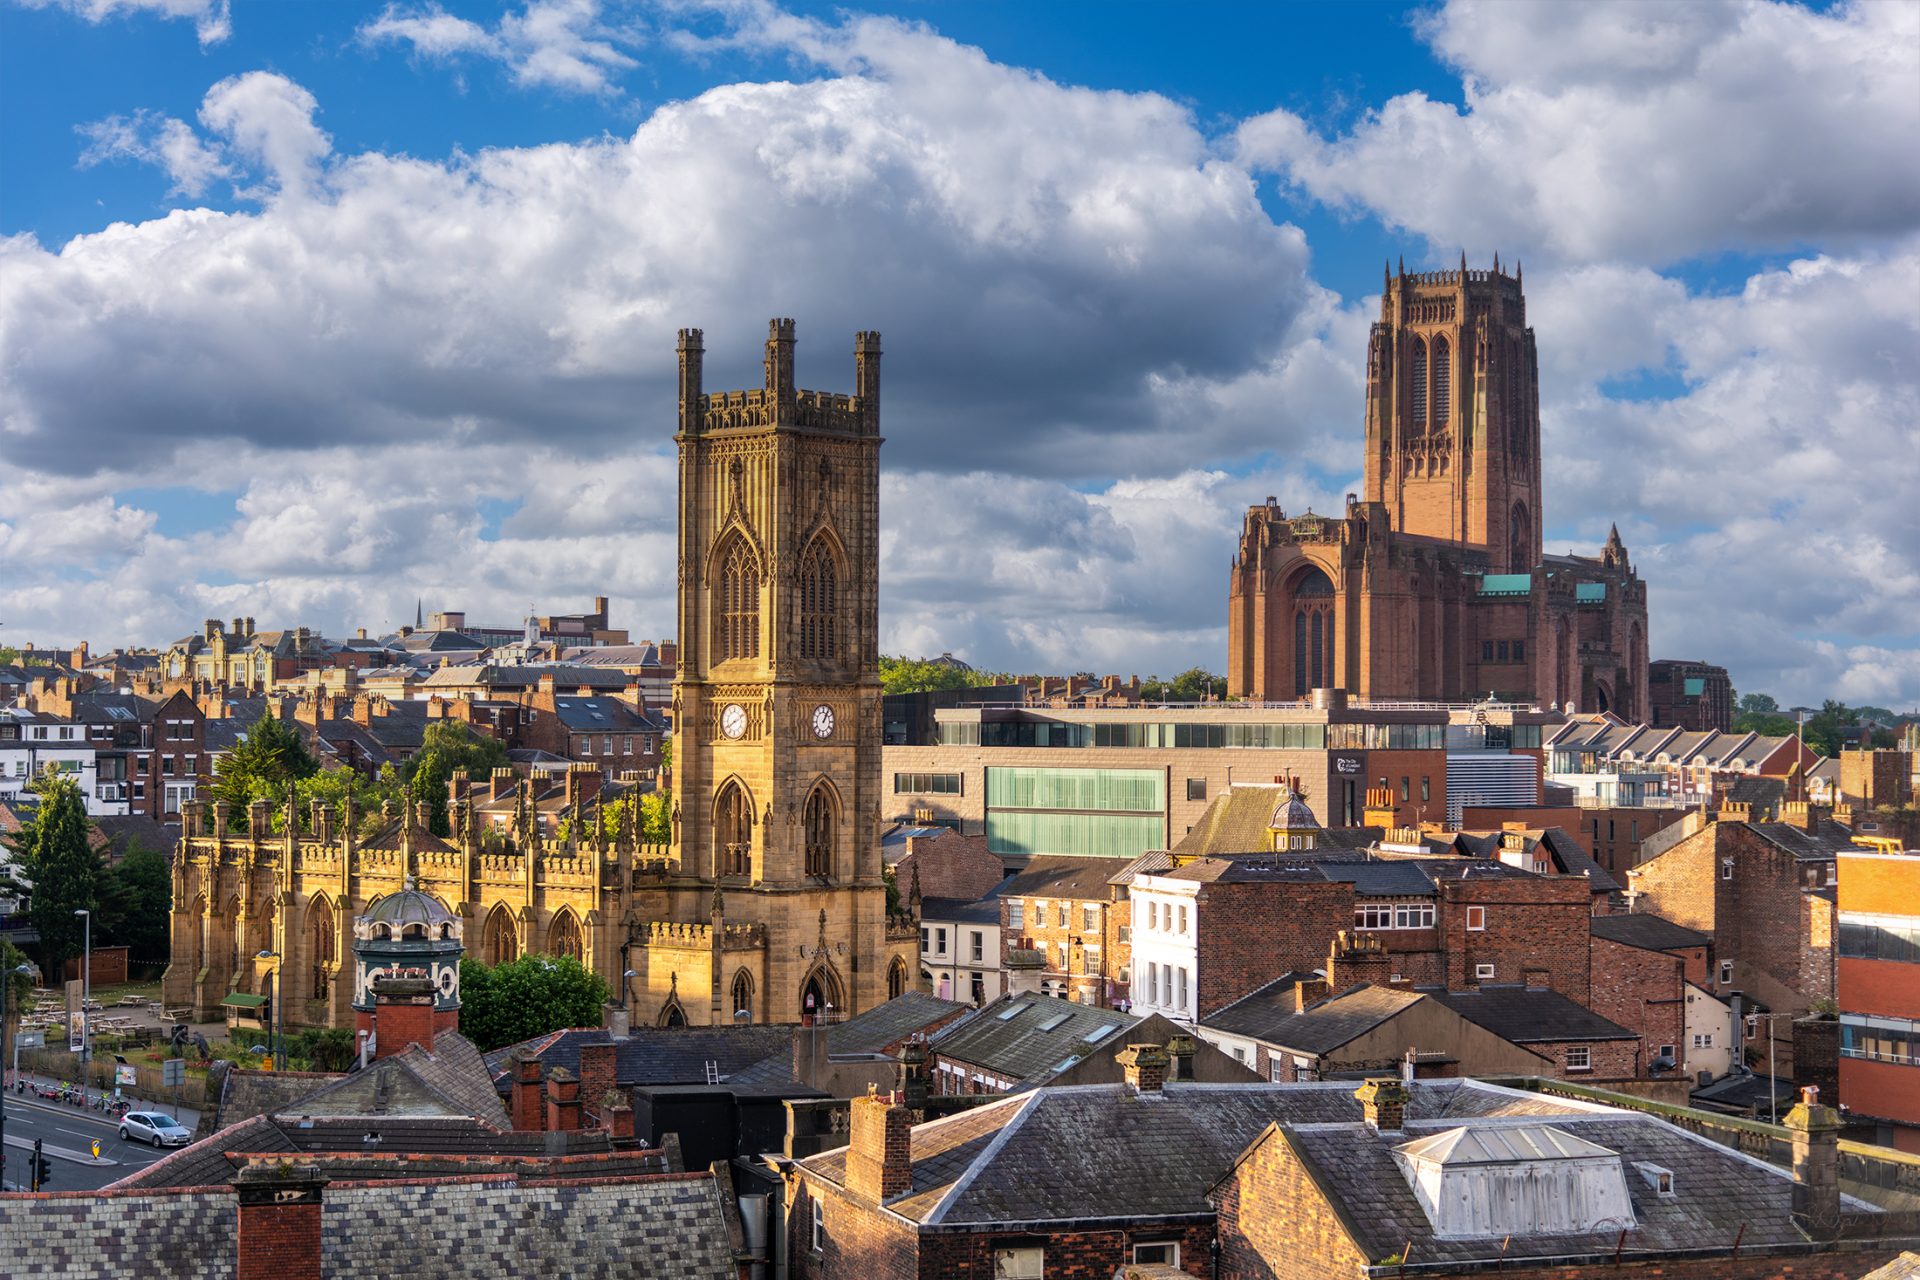 St Luke's Bombed Out Church and Liverpool Cathedral